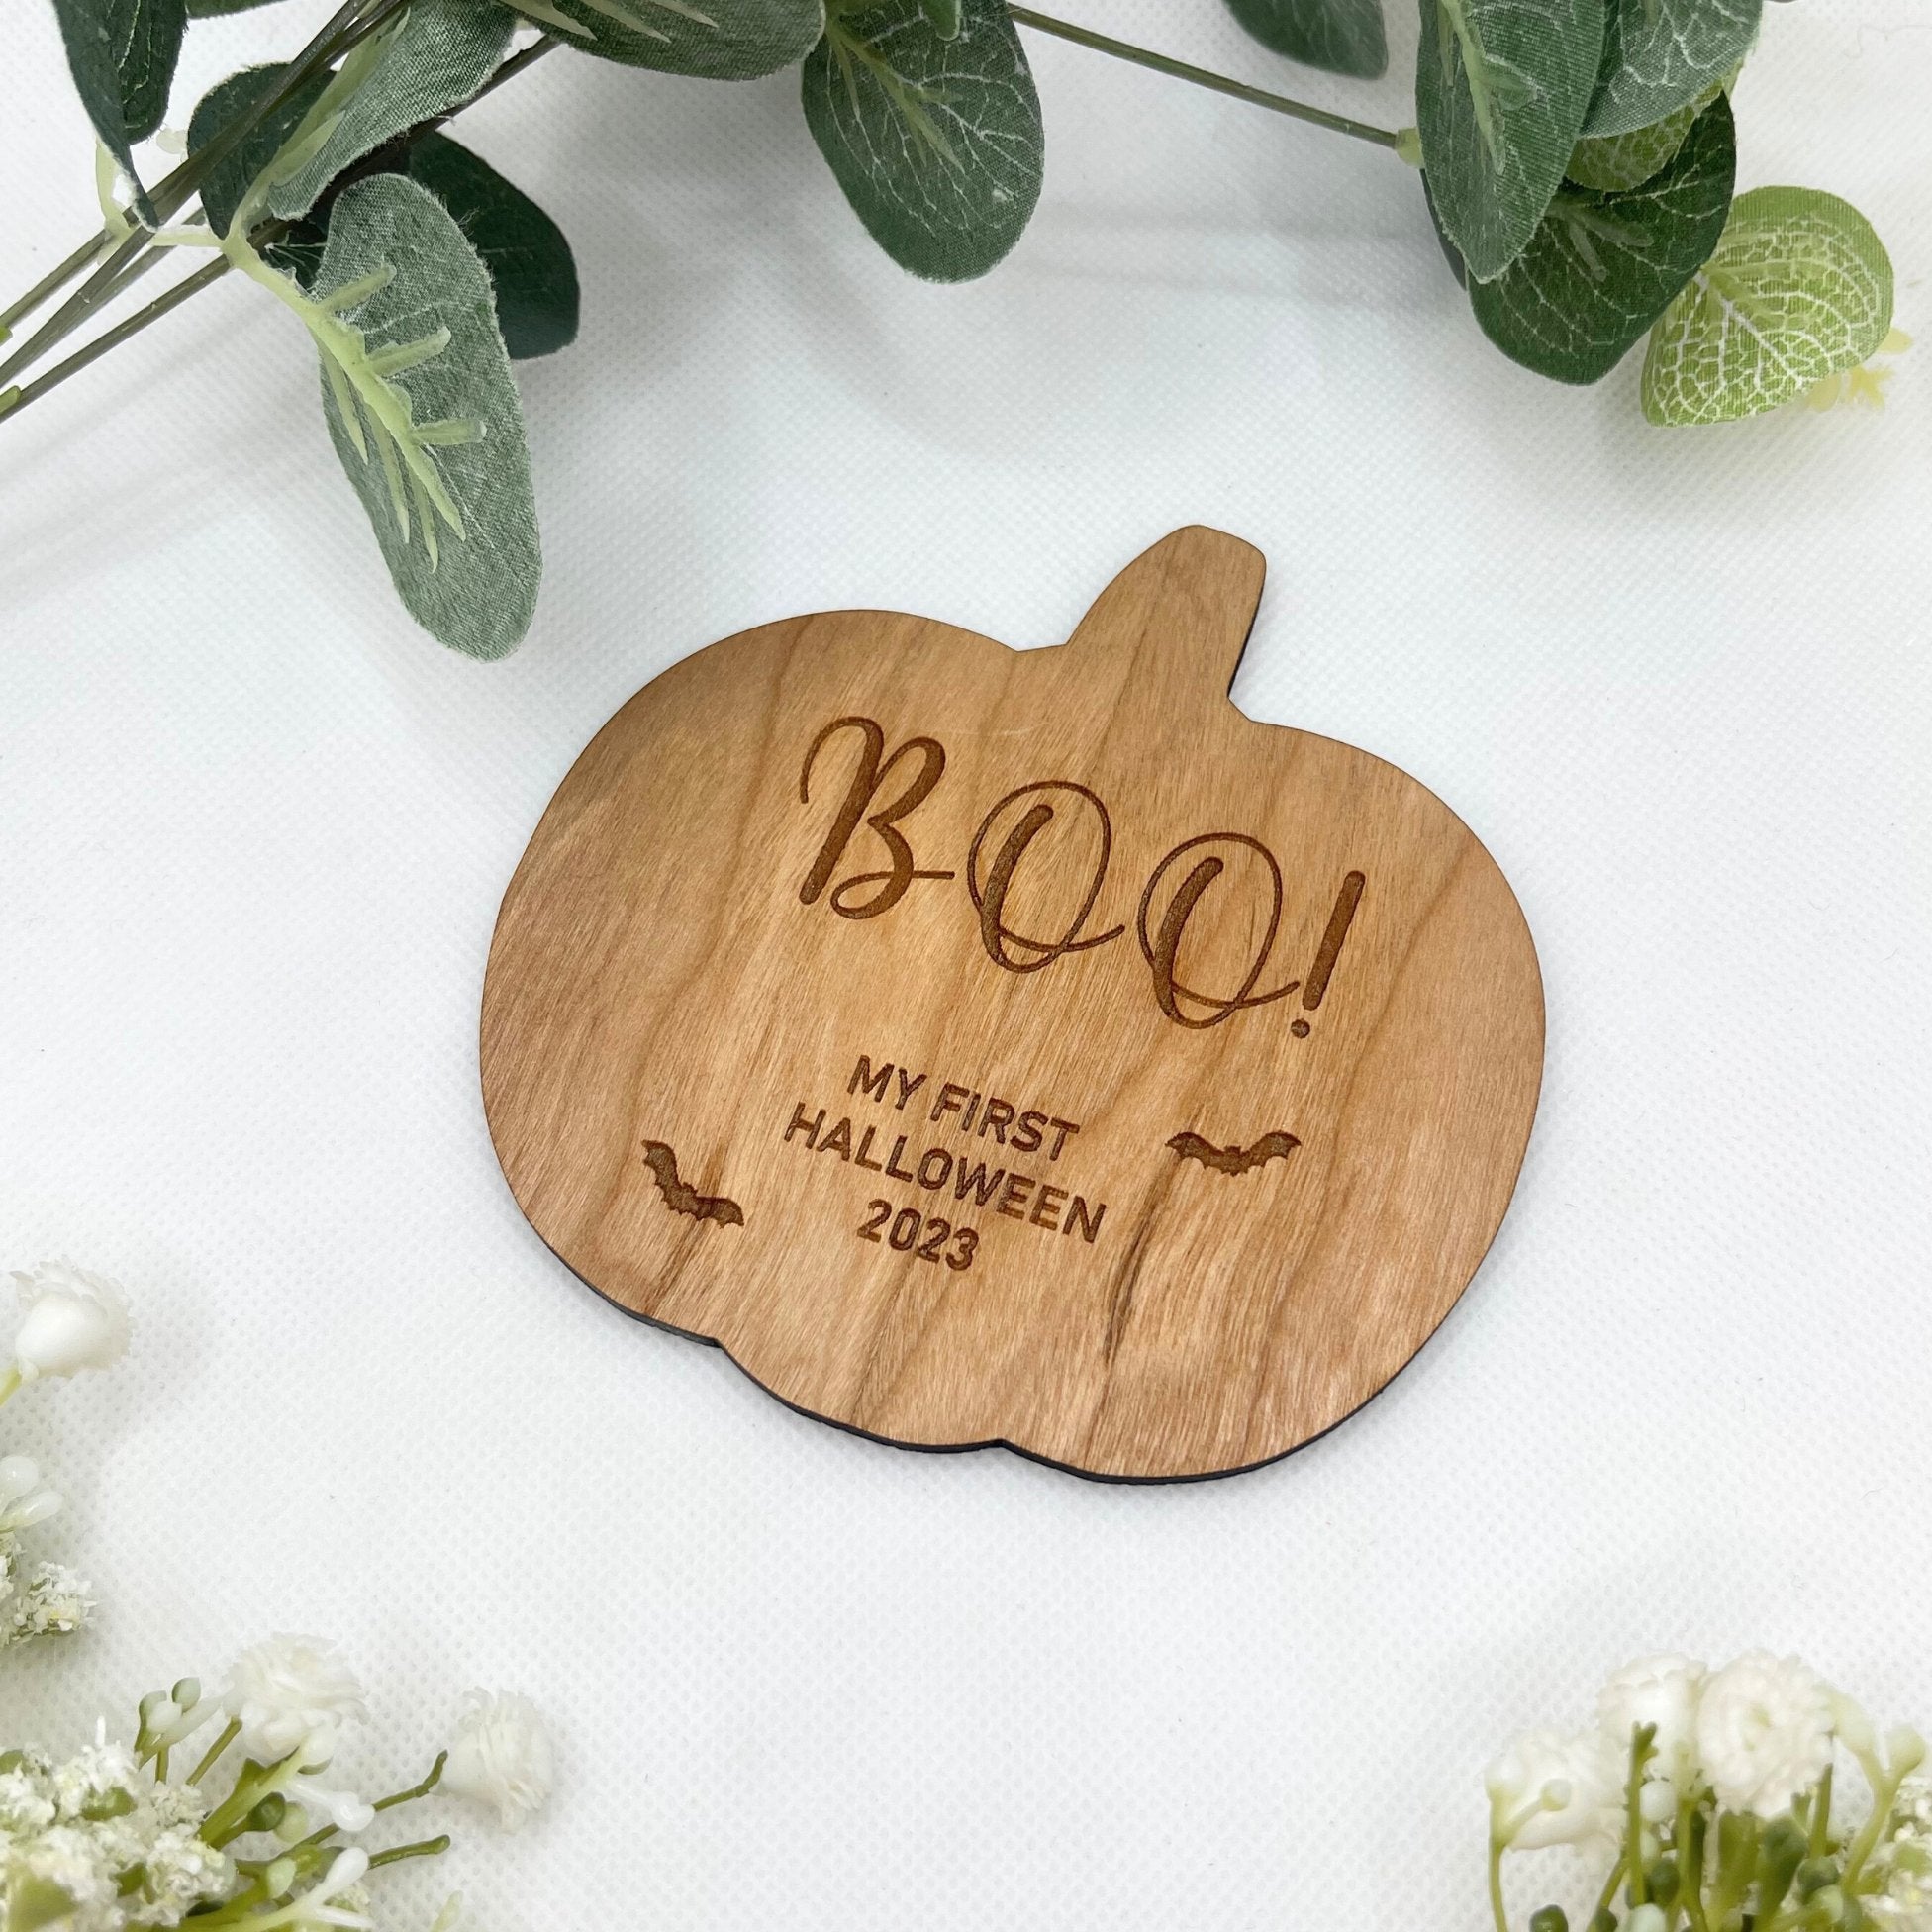 Introducing our charming 'Boo! My First Halloween' pumpkin-shaped plaque – a personalized keepsake crafted from cherry wood, adorned with delightful bats. Capture the magic of your baby's first Halloween in style!